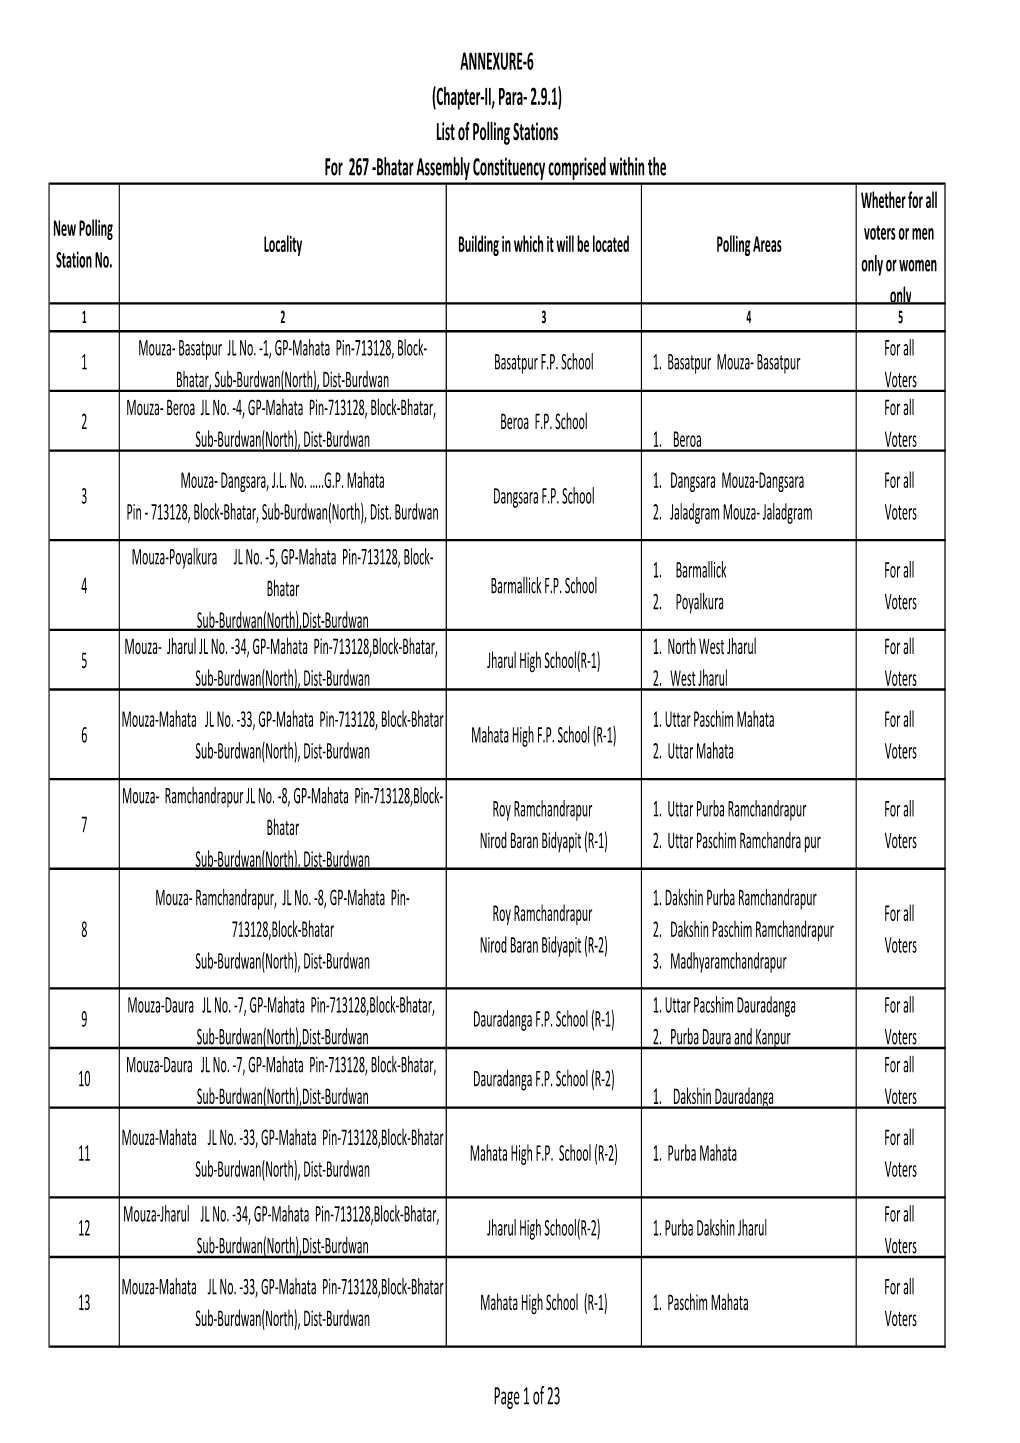 List of Polling Stations for 267 -Bhatar Assembly Constituency